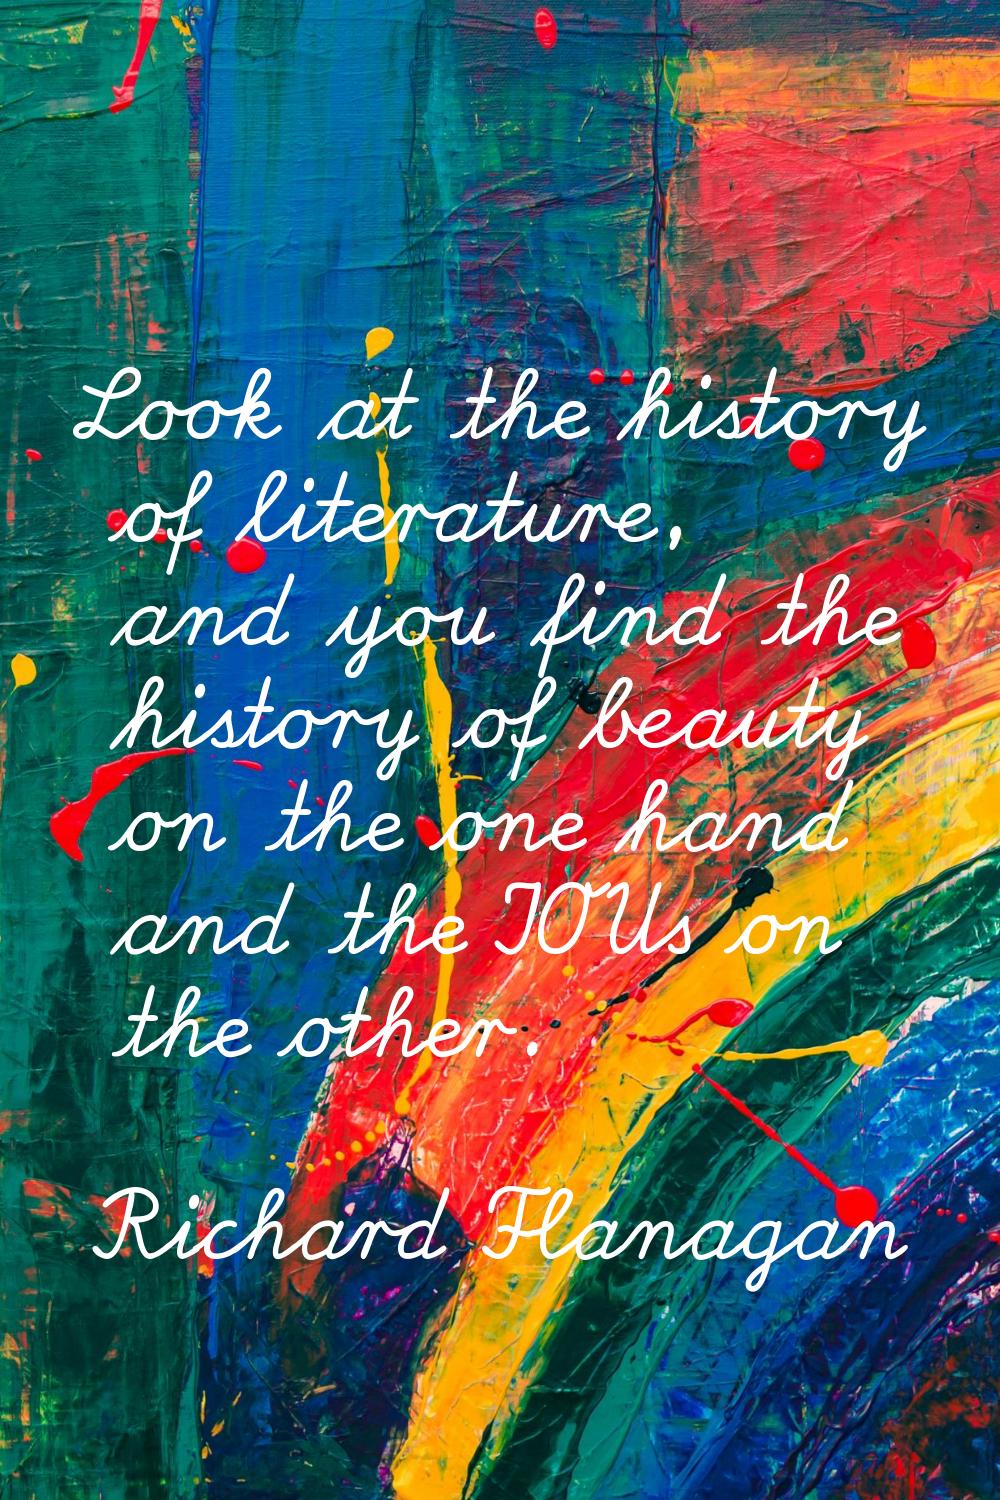 Look at the history of literature, and you find the history of beauty on the one hand and the IOUs 